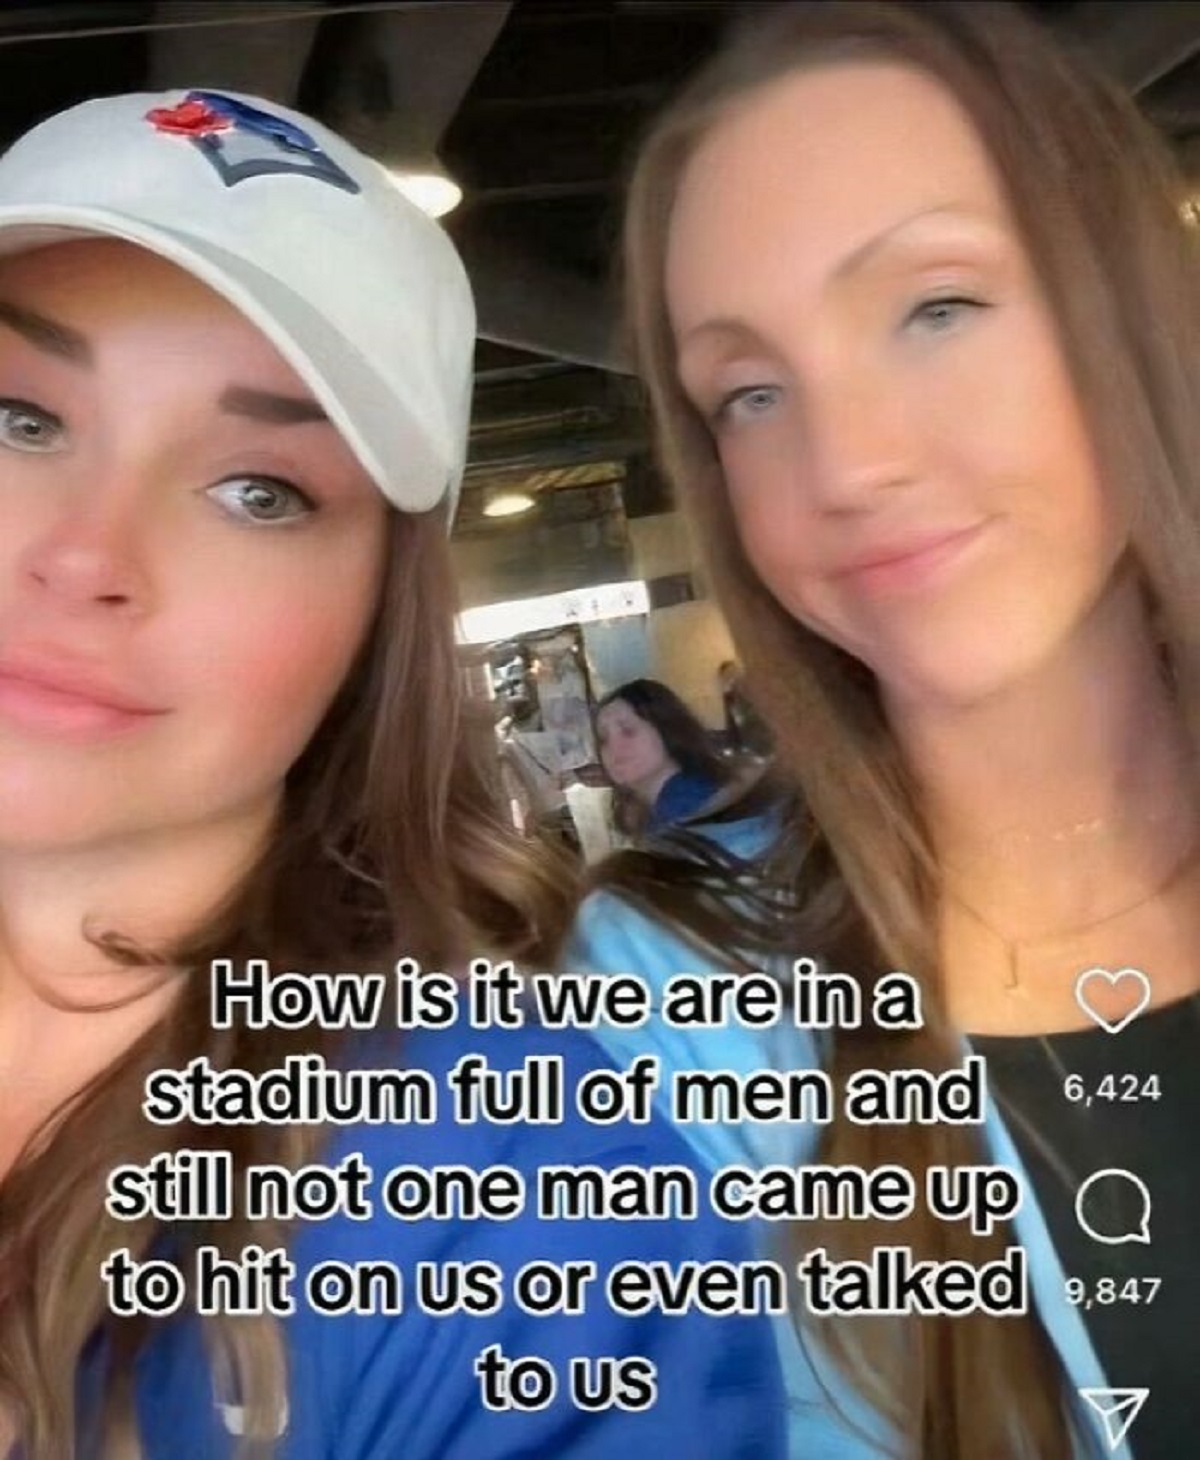 Woman - How is it we are in a stadium full of men and 6,424 still not one man came up a to hit on us or even talked 9,847 to us